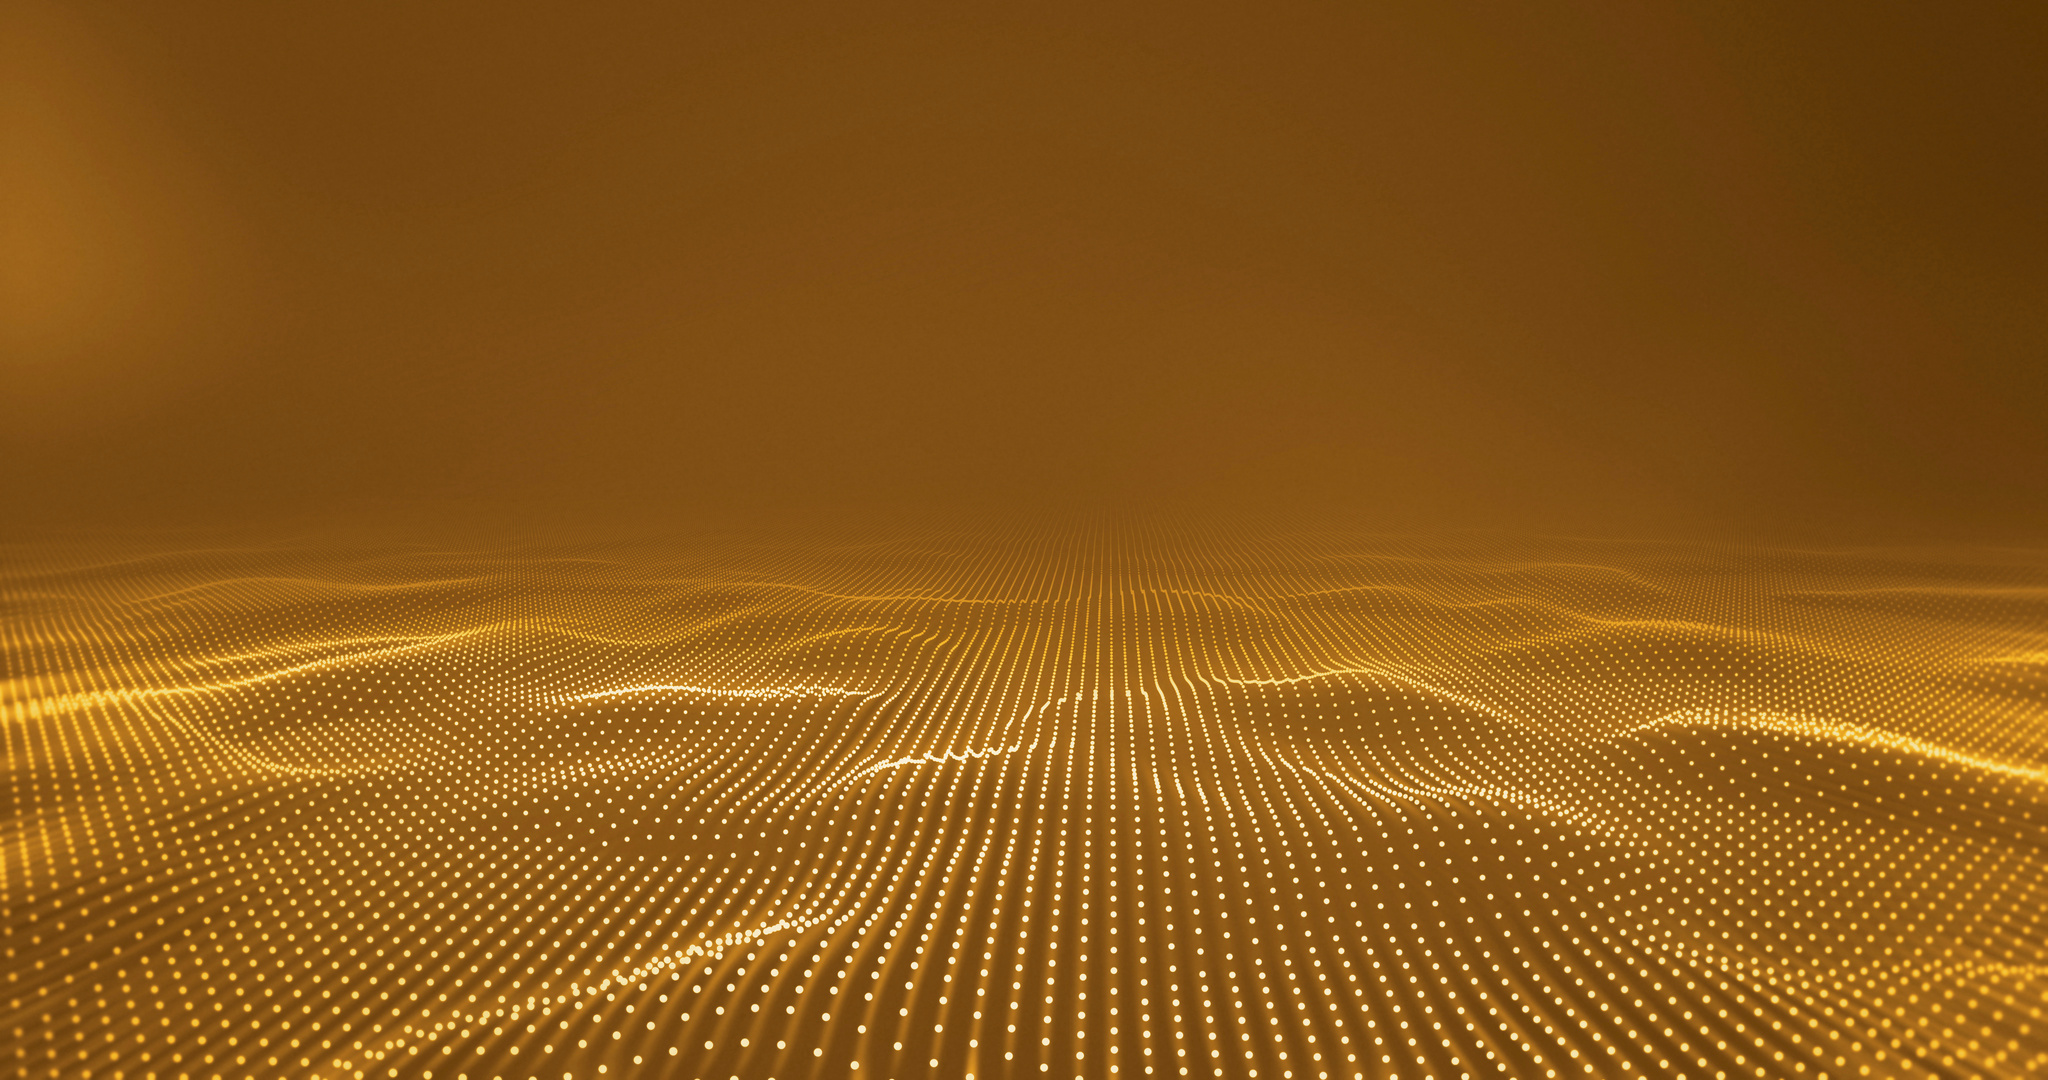 Data submerged in golden sea metaverse. Abstract floor technology background. Tech business concept.